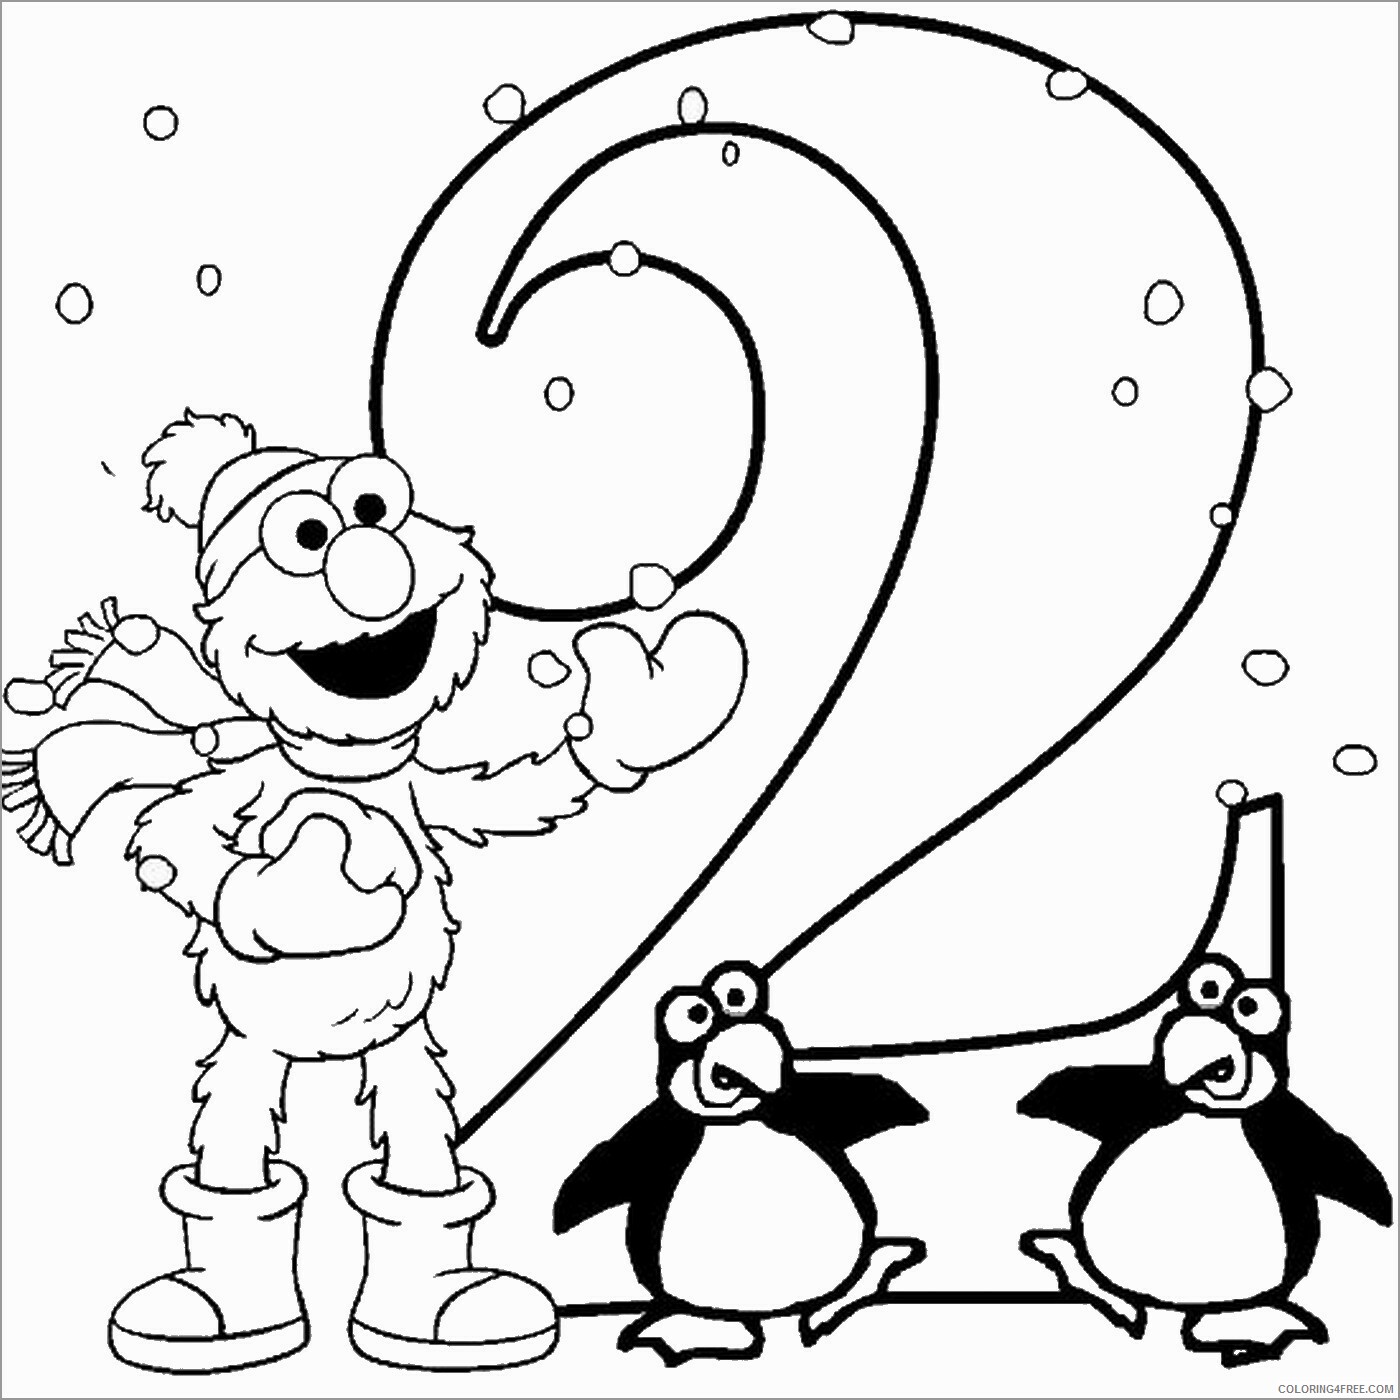 Sesame Street Coloring Pages TV Film Printable 2020 07449 Coloring4free